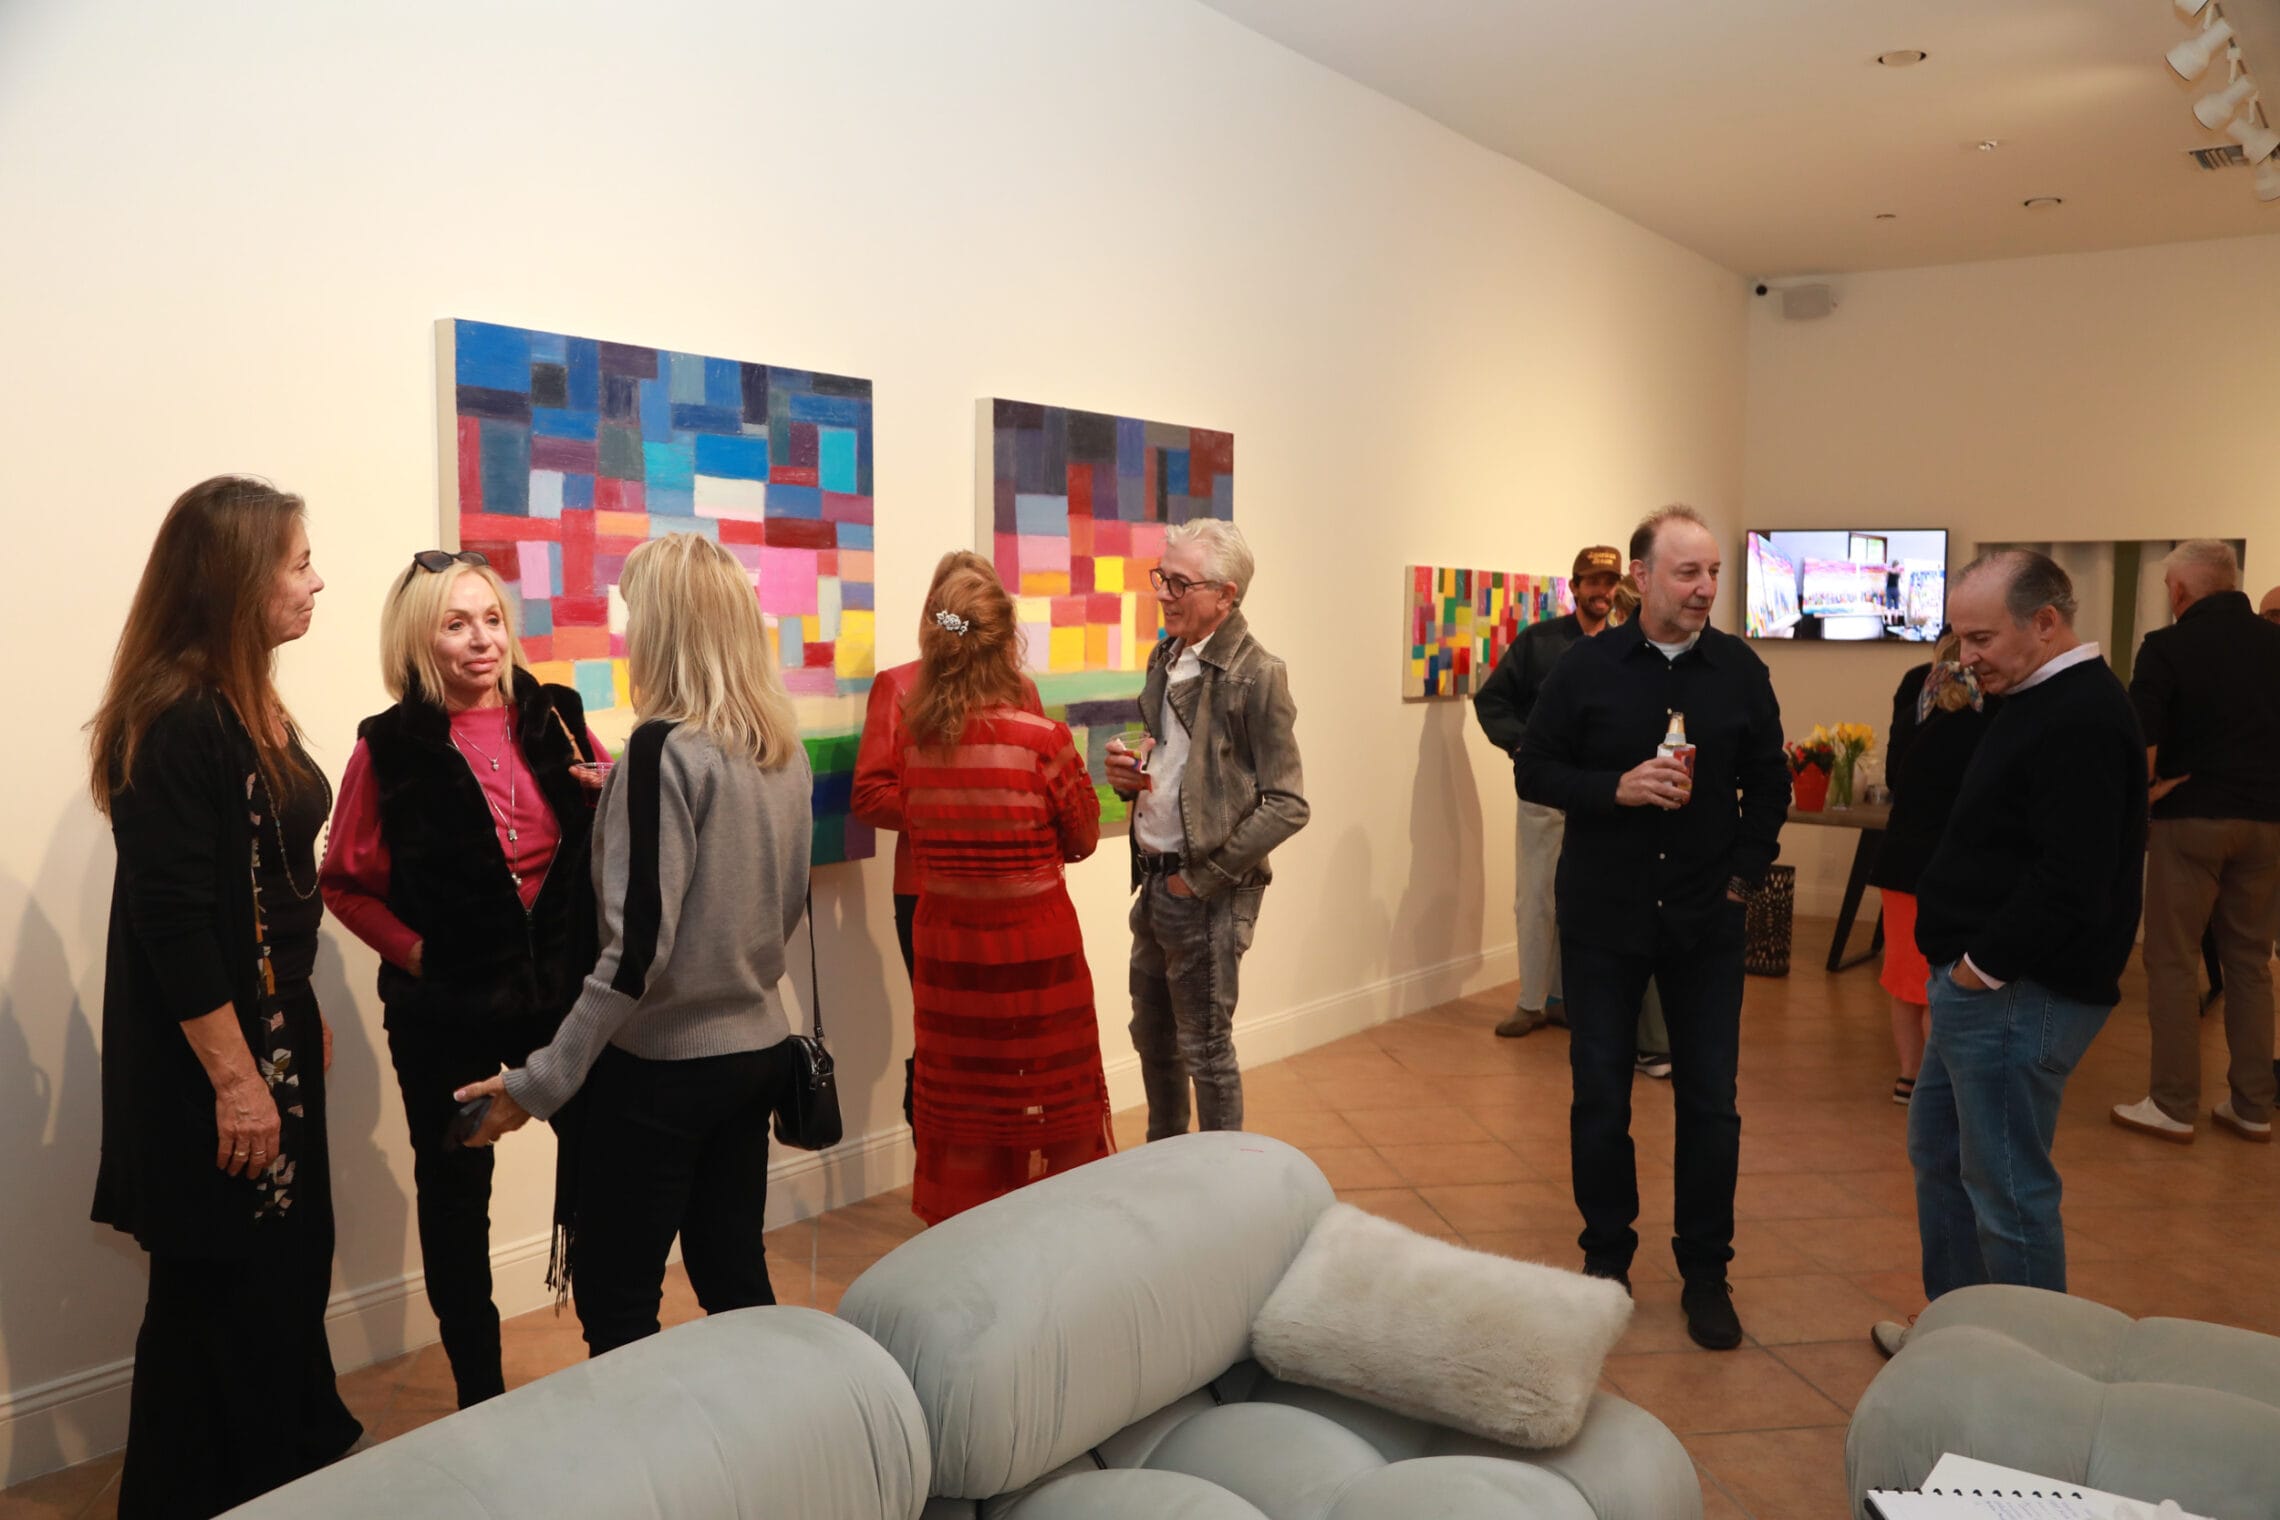 Guests at the opening of Van Zaig Gallery.